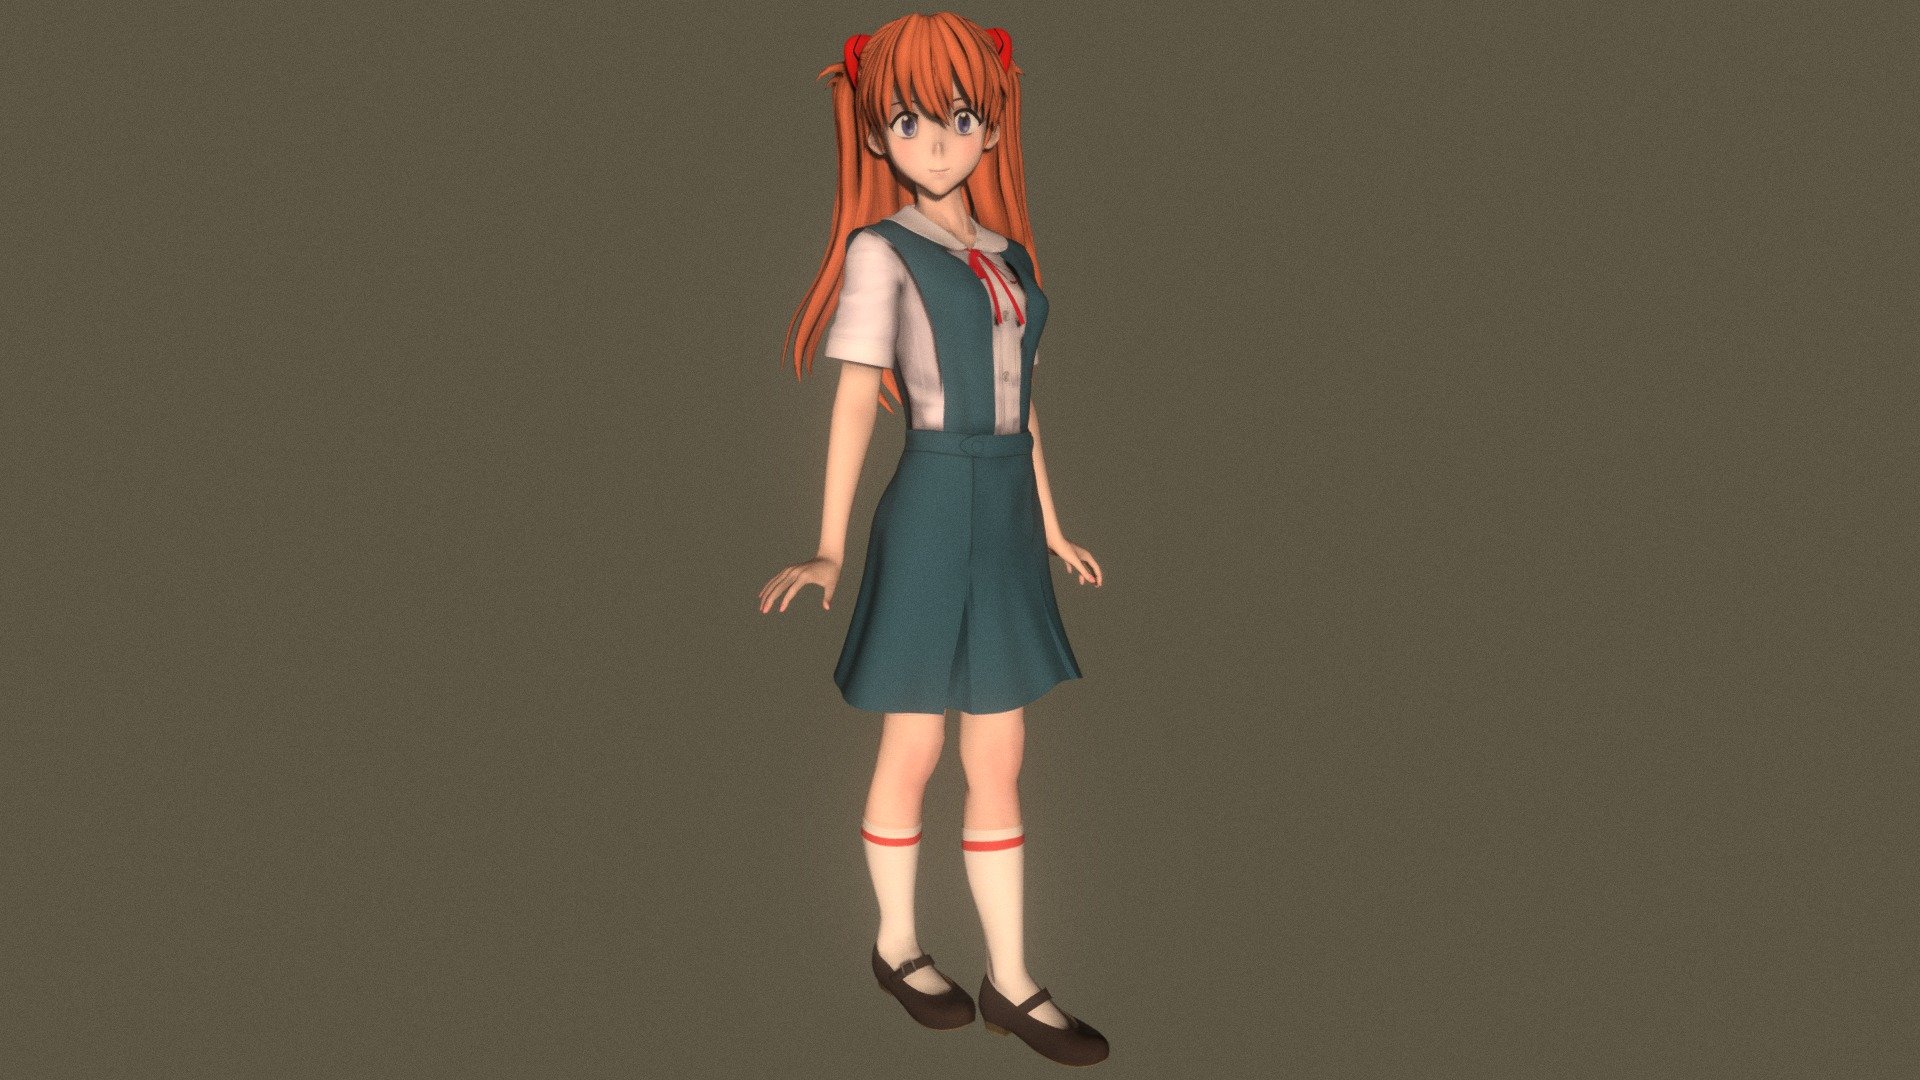 Posed model of anime girl Asuka Langley Soryu (Neon Genesis Evangelion).

This product include .FBX (ver. 7200) and .MAX (ver. 2010) files.

Rigged version: https://sketchfab.com/3d-models/t-pose-rigged-model-of-asuka-langley-soryu-d1300b98643149c98a175f61ab6c8bed

I support convert this 3D model to various file formats: 3DS; AI; ASE; DAE; DWF; DWG; DXF; FLT; HTR; IGS; M3G; MQO; OBJ; SAT; STL; W3D; WRL; X.

You can buy all of my models in one pack to save cost: https://sketchfab.com/3d-models/all-of-my-anime-girls-c5a56156994e4193b9e8fa21a3b8360b

And I can make commission models.

If you have any questions, please leave a comment or contact me via my email 3d.eden.project@gmail.com 3d model